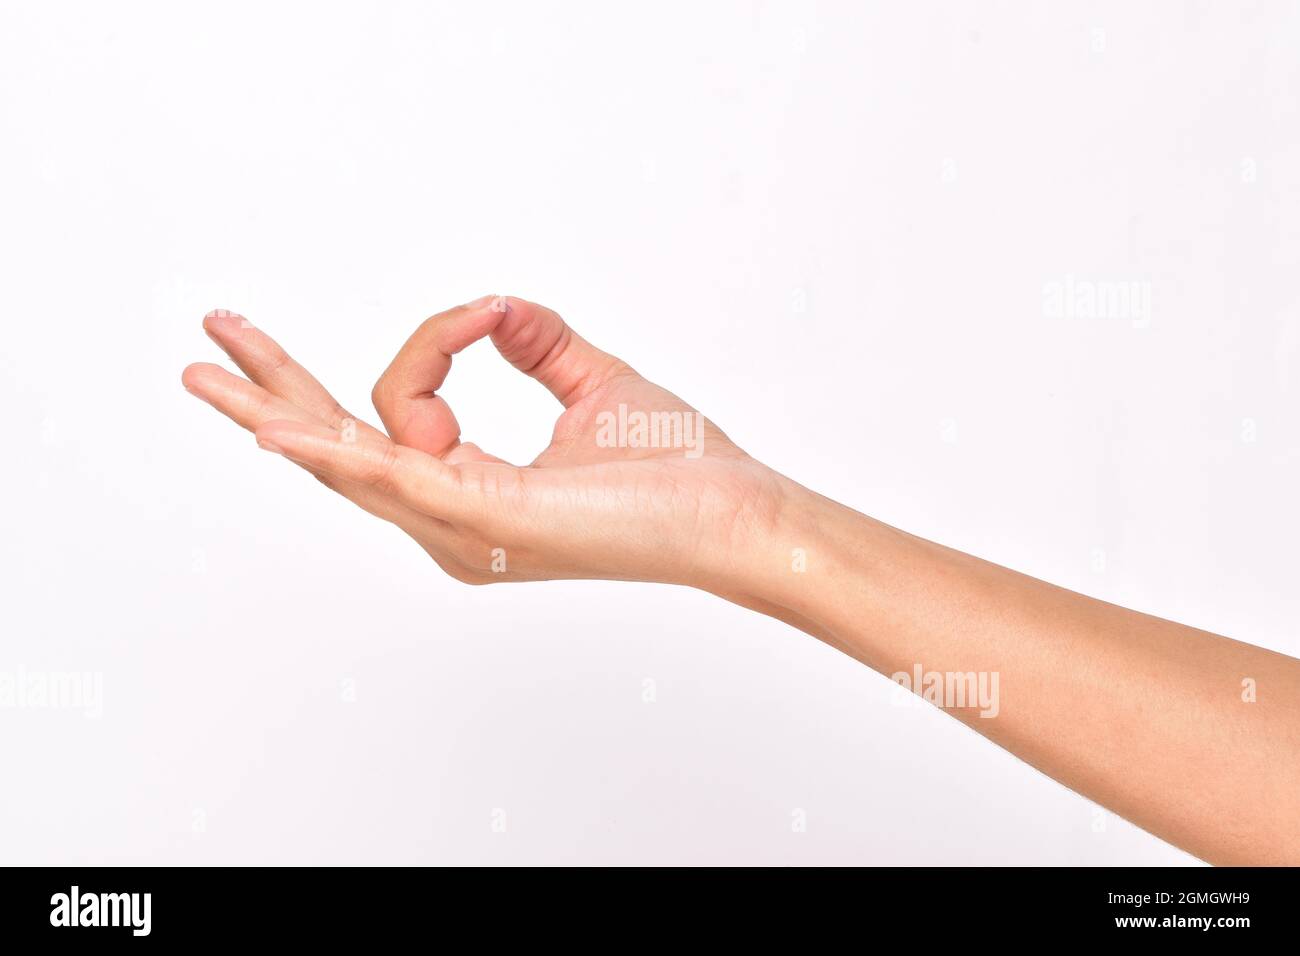 Gyan Mudra Gesture Hand Isolated on White Background with Clipping Path Stock Photo